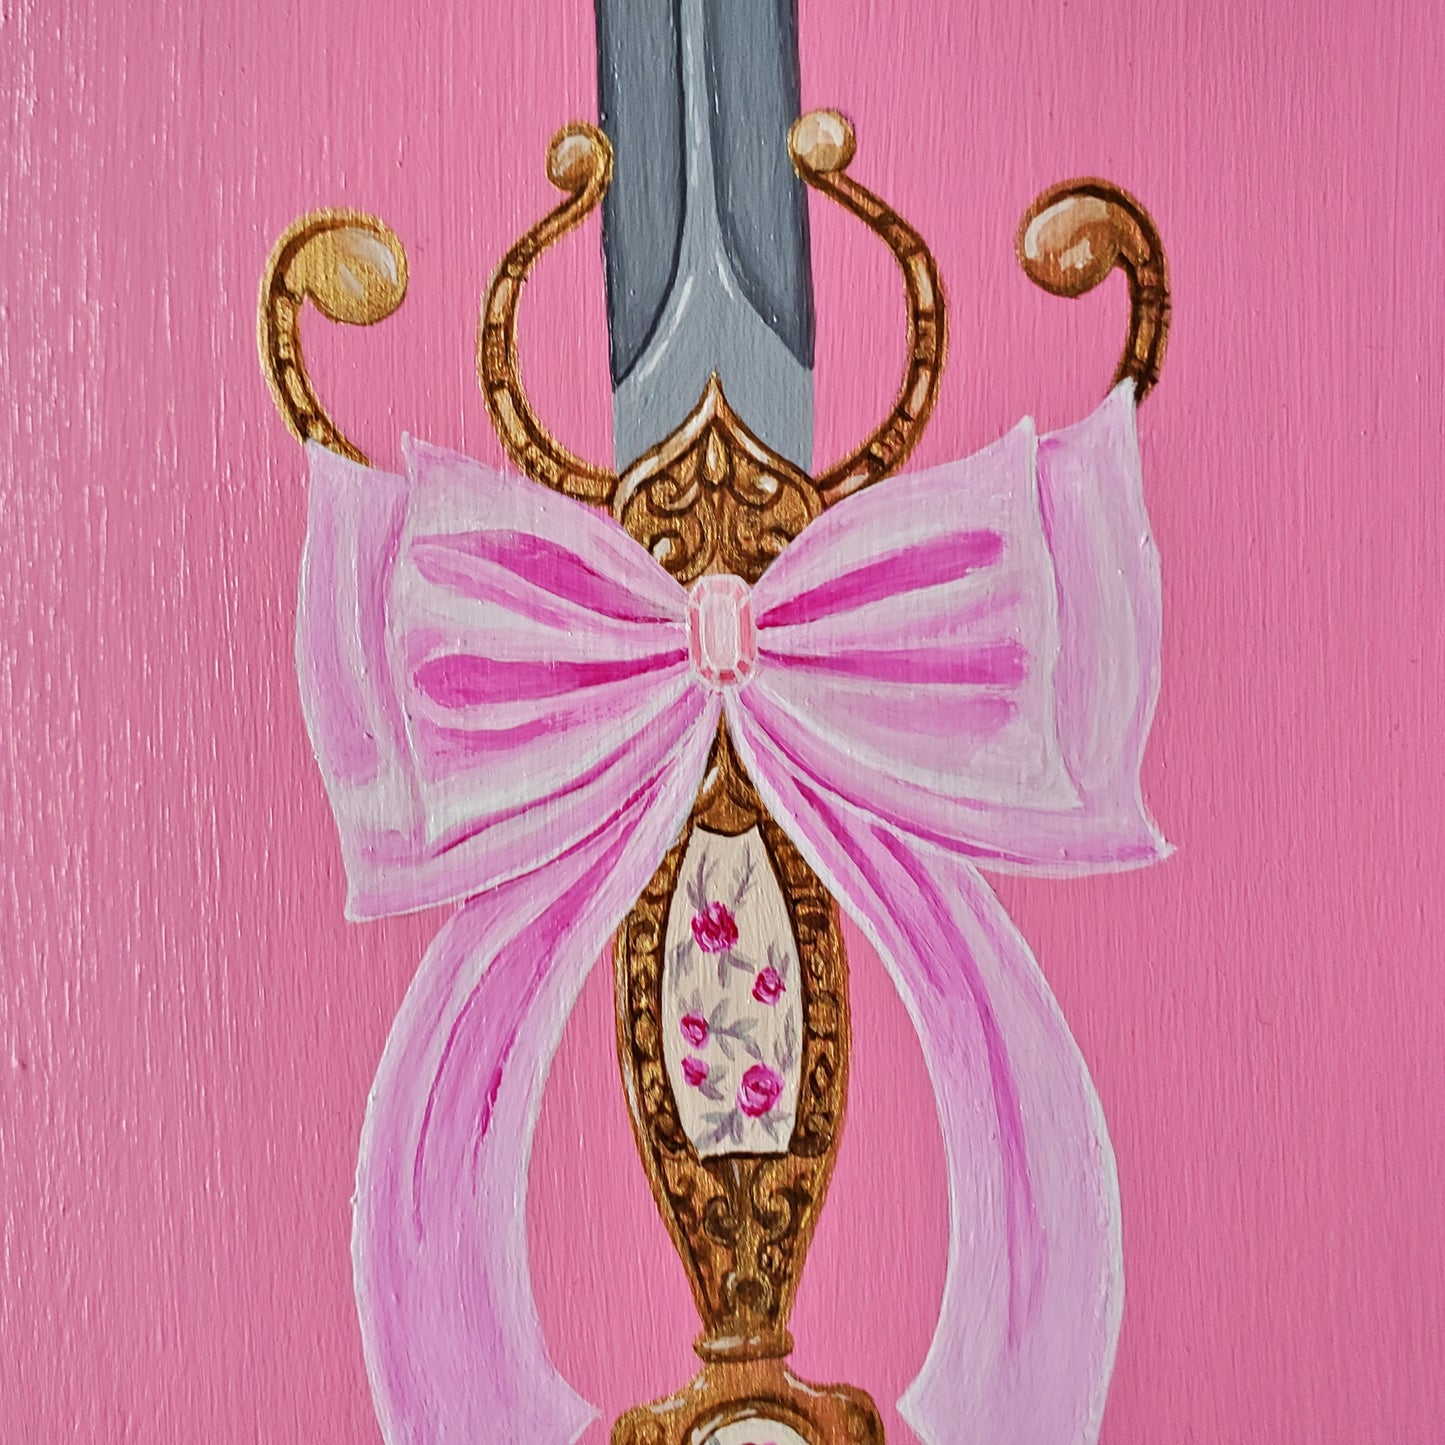 Coquette Sword Painting